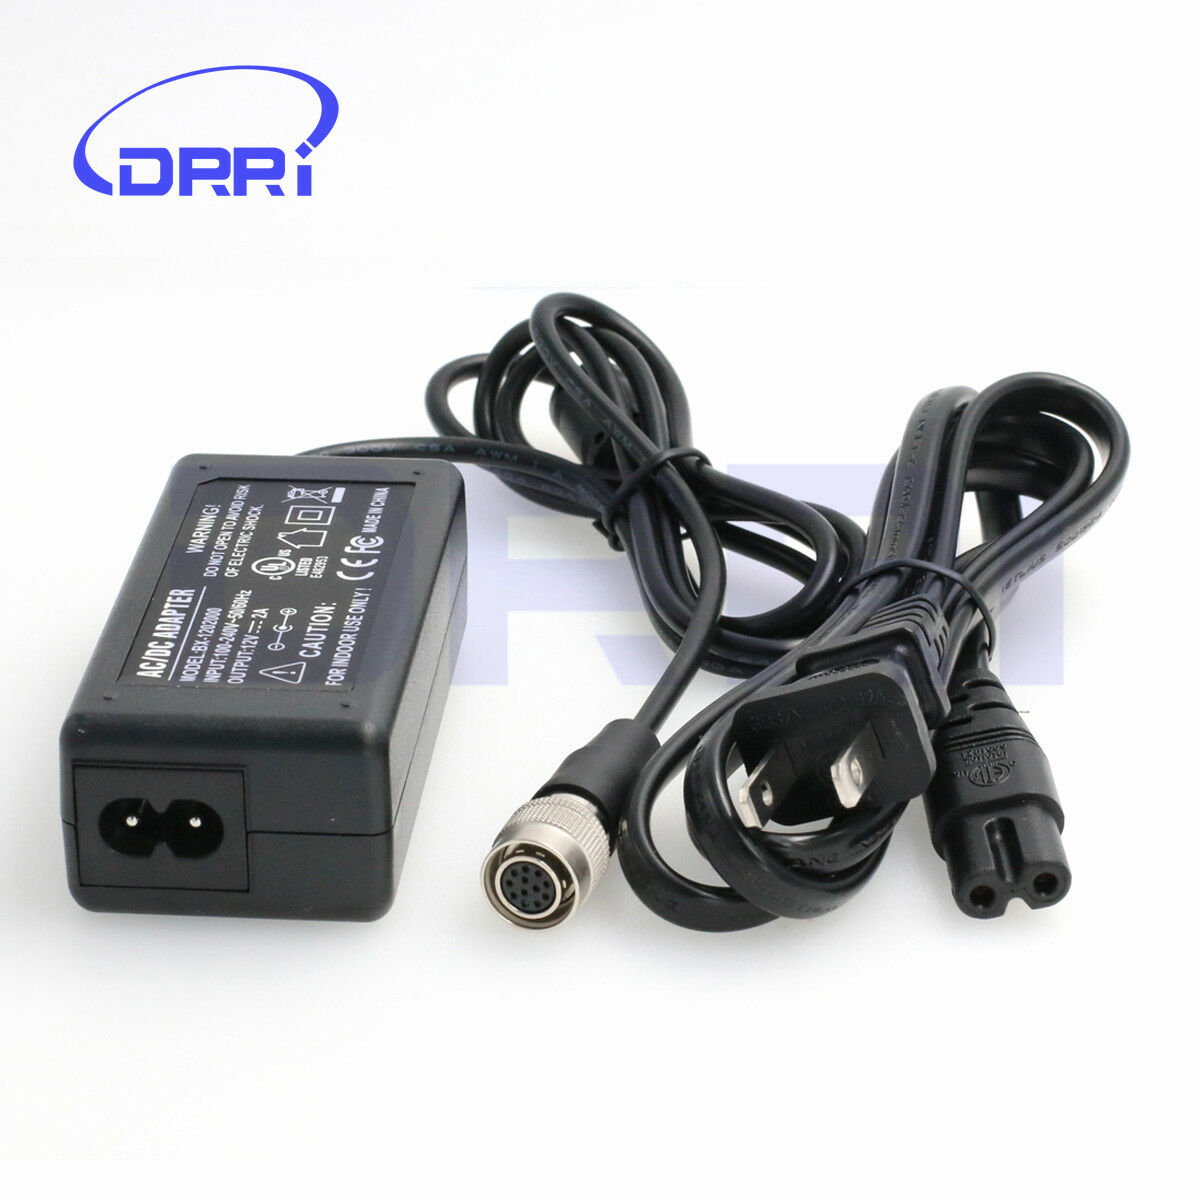 12V DC Power Supply Adapter to 12 Pin Female Hirose for Basler Camera Country/Region of Manufacture: China Type: AC/D